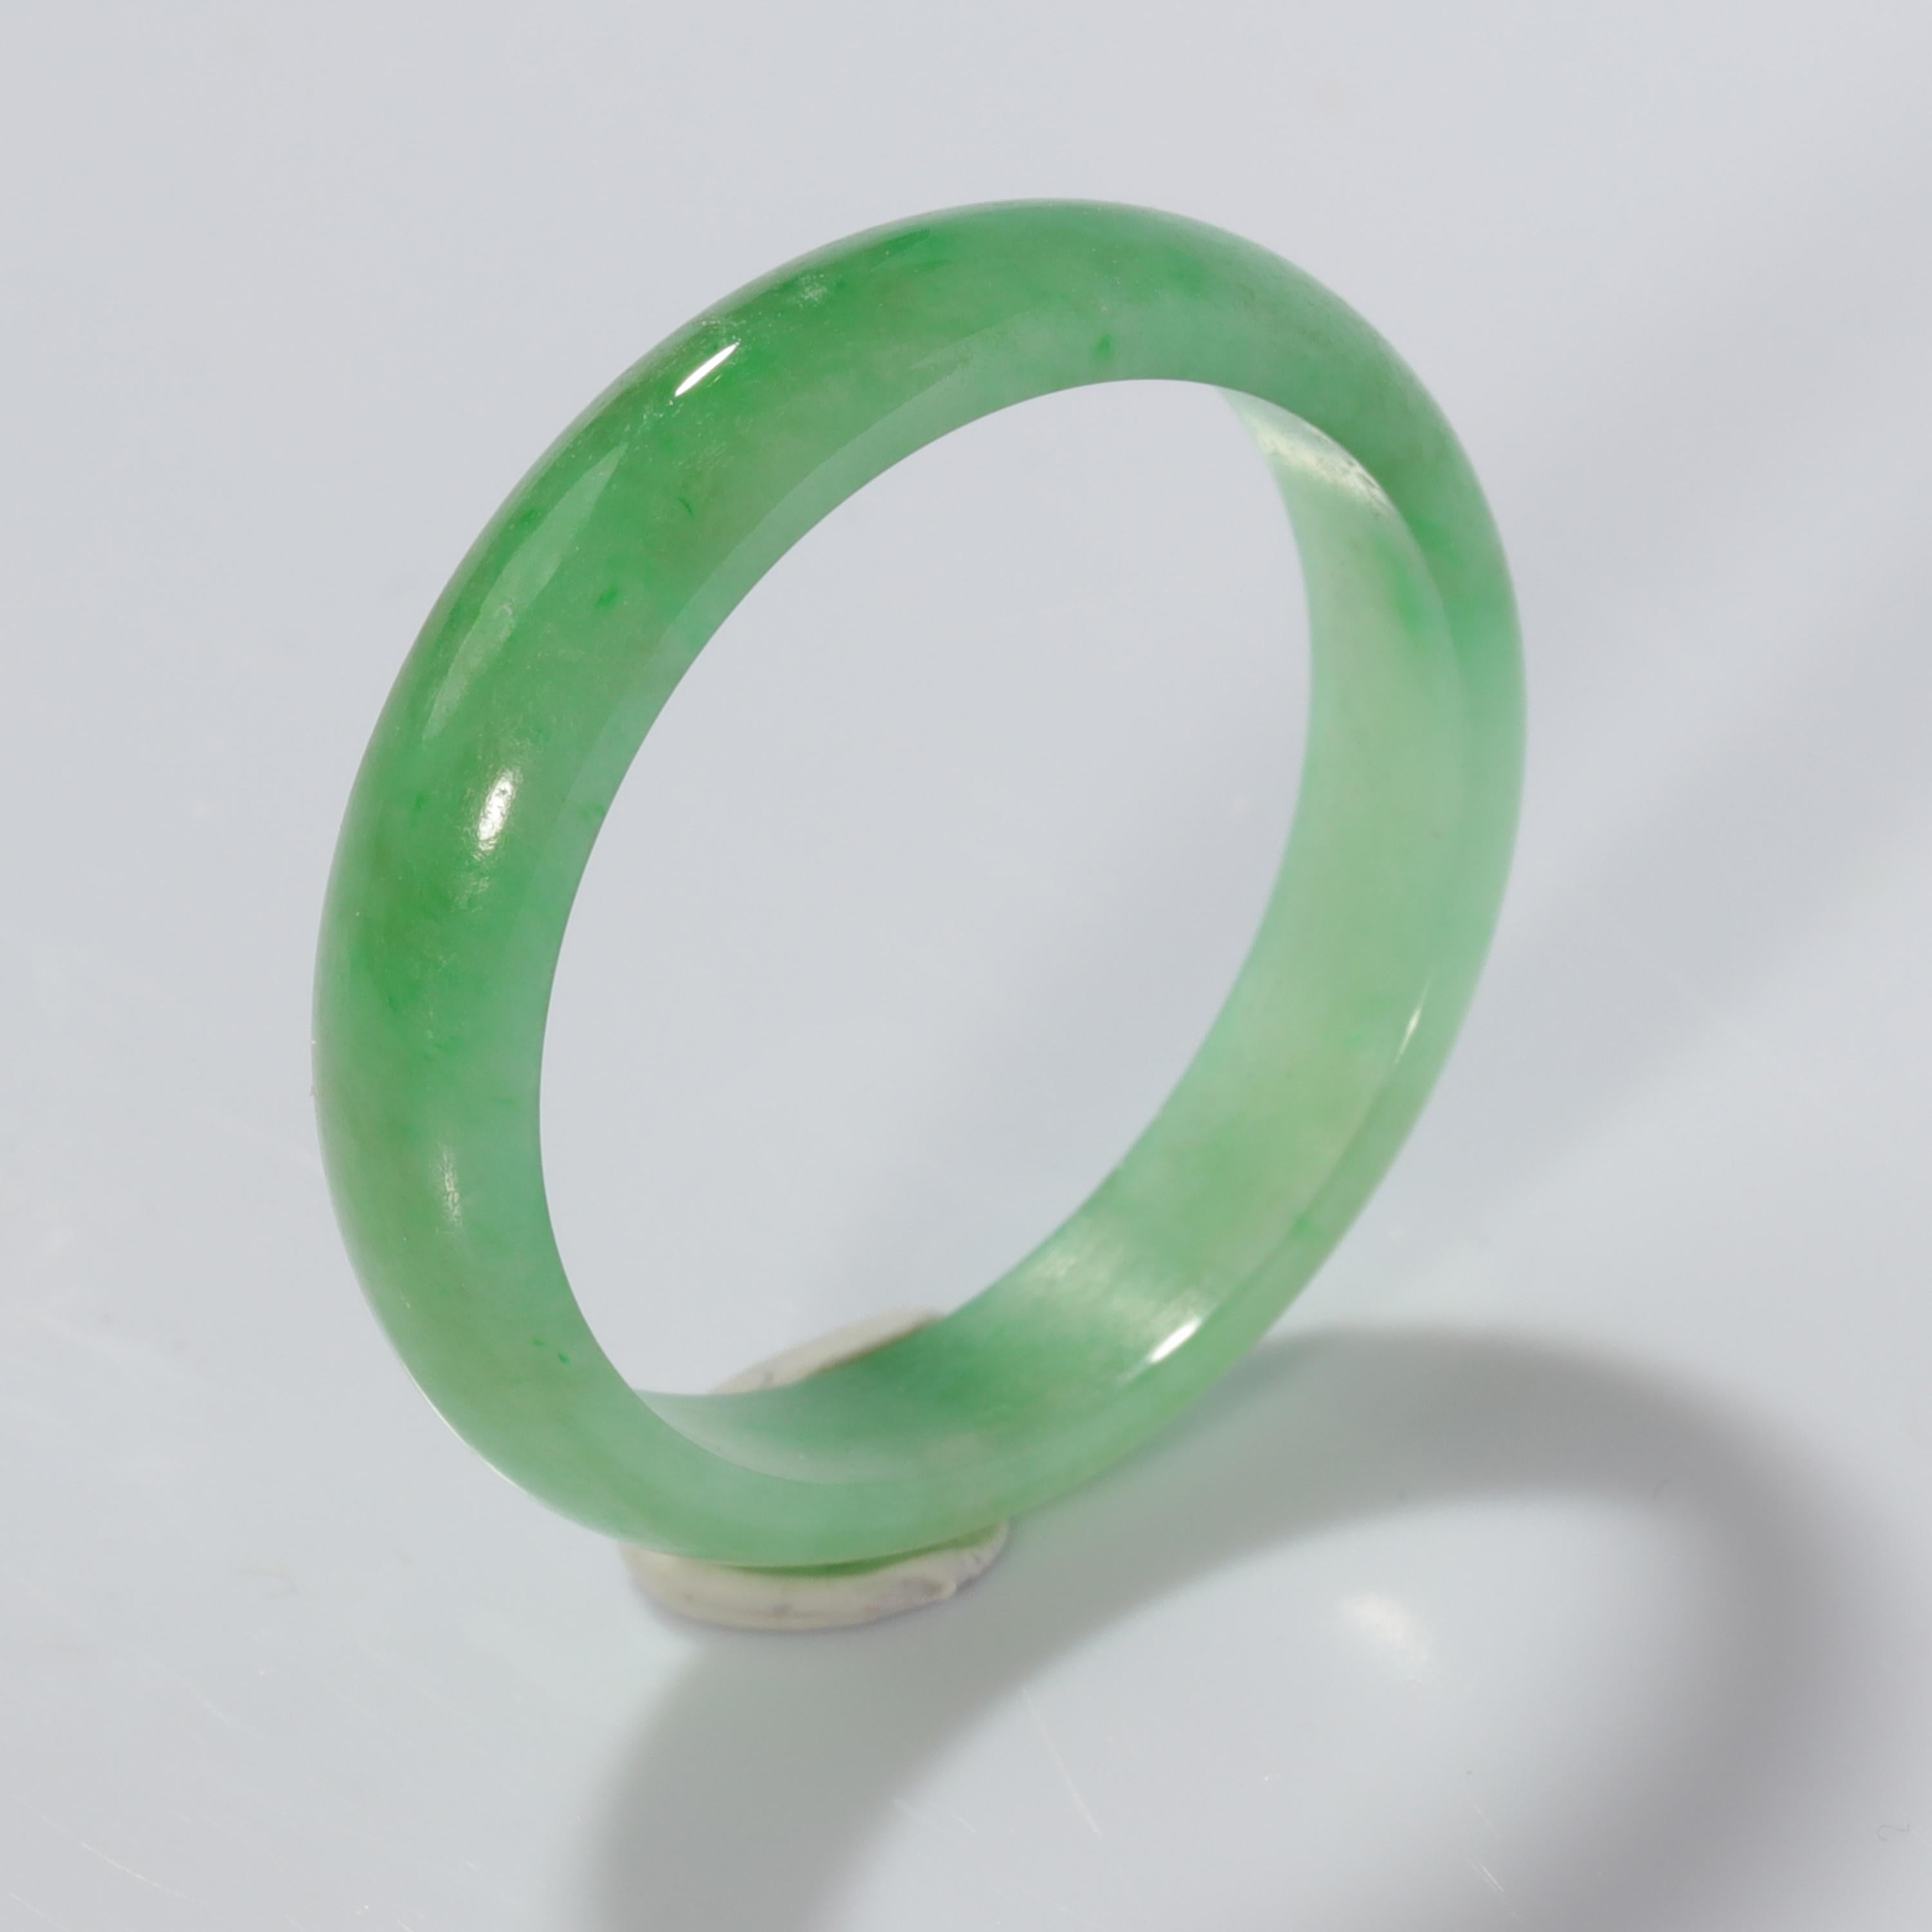 A pristine, never worn band of finely colored and translucent green makes for a most strikingly unique, beautiful, and durable wedding band. Or un-wedding band. Or stack ring. Or just the ring you buy yourself because you require a bump of